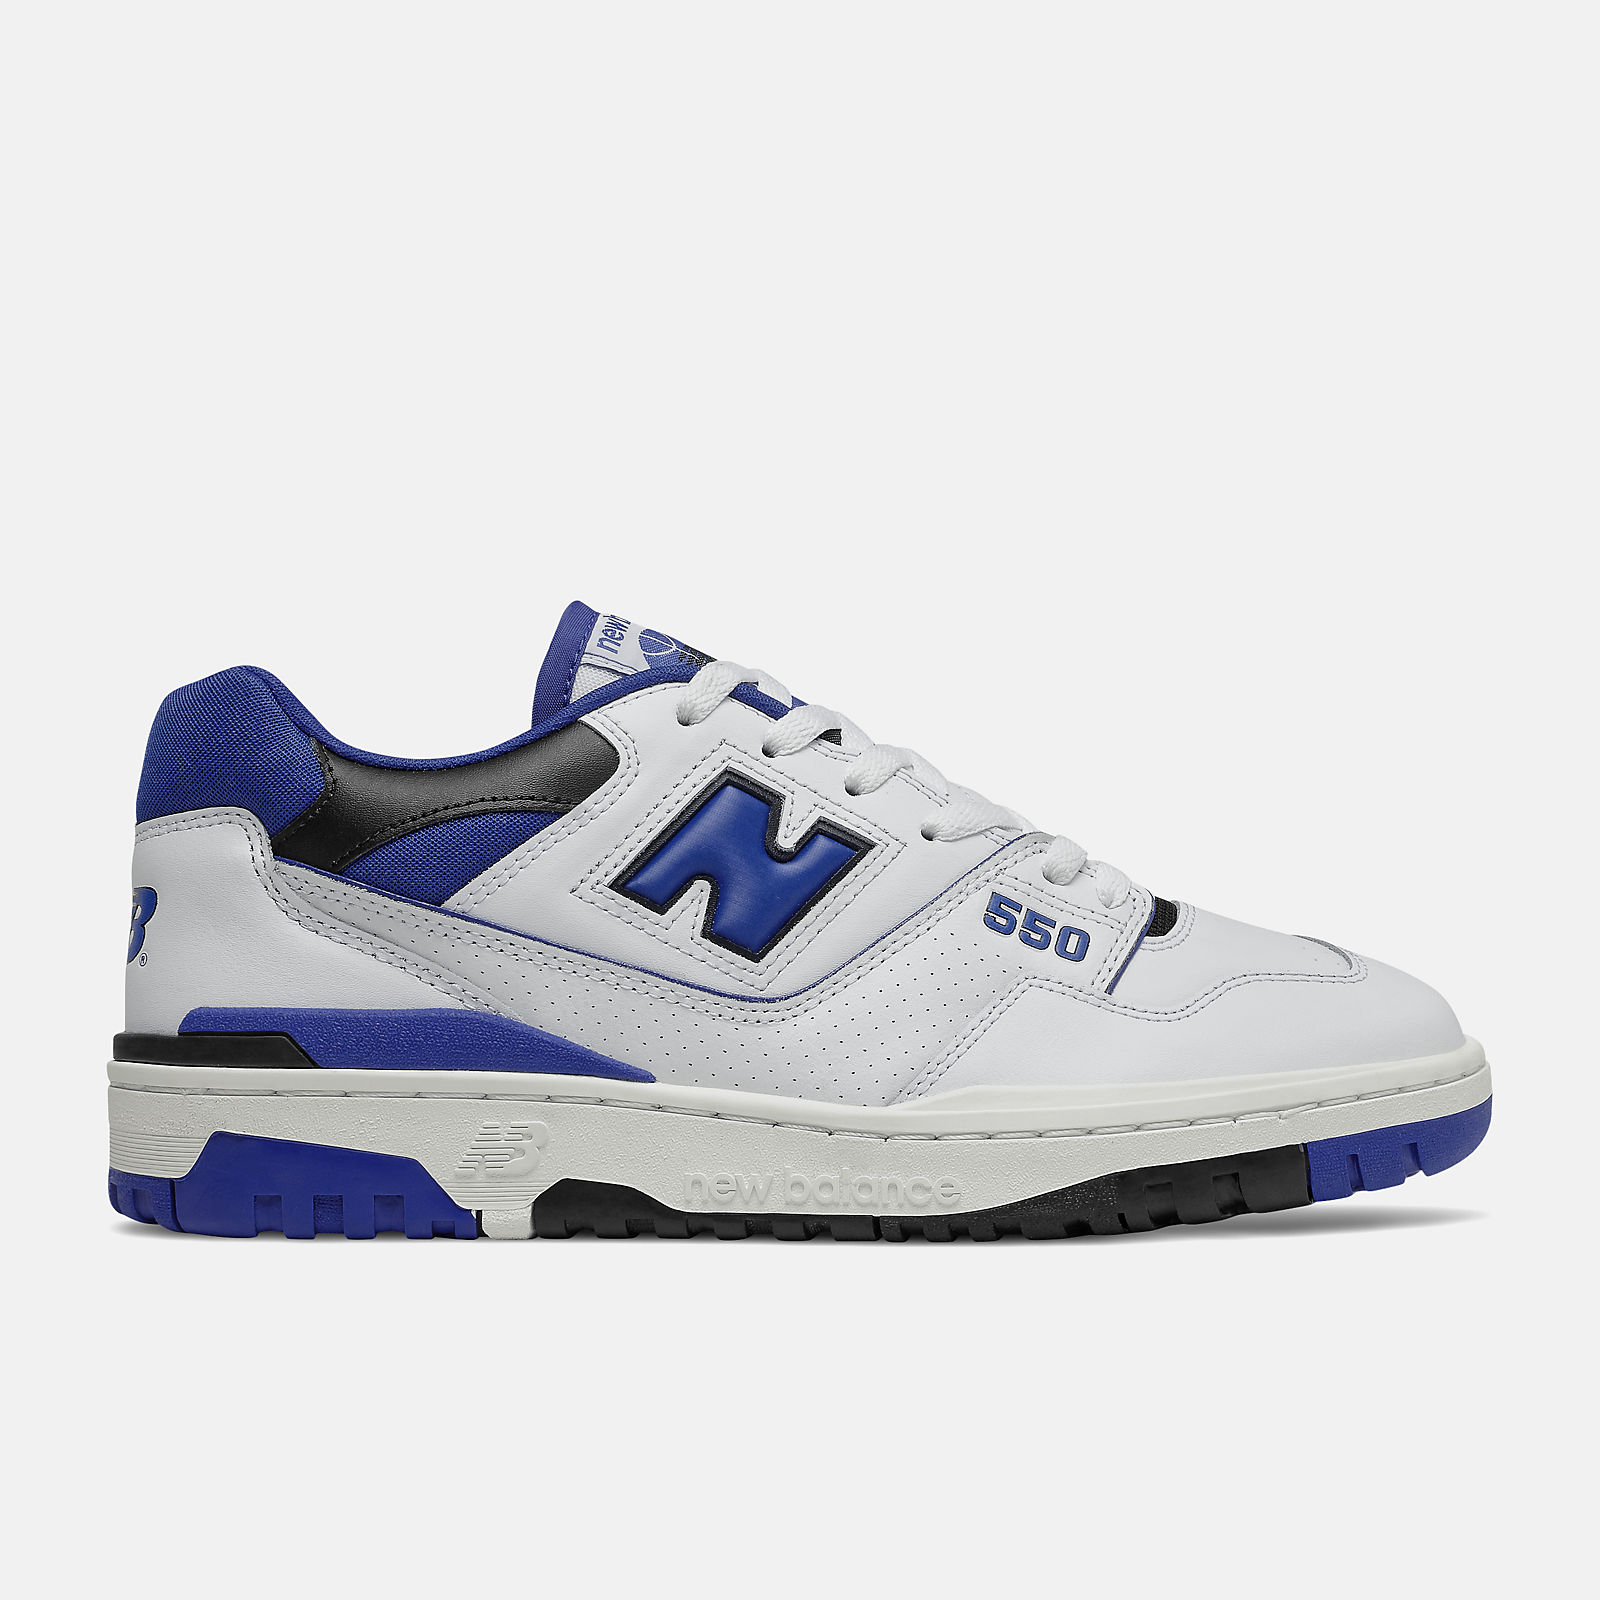 New Balance men's colour blocked low top sneakers